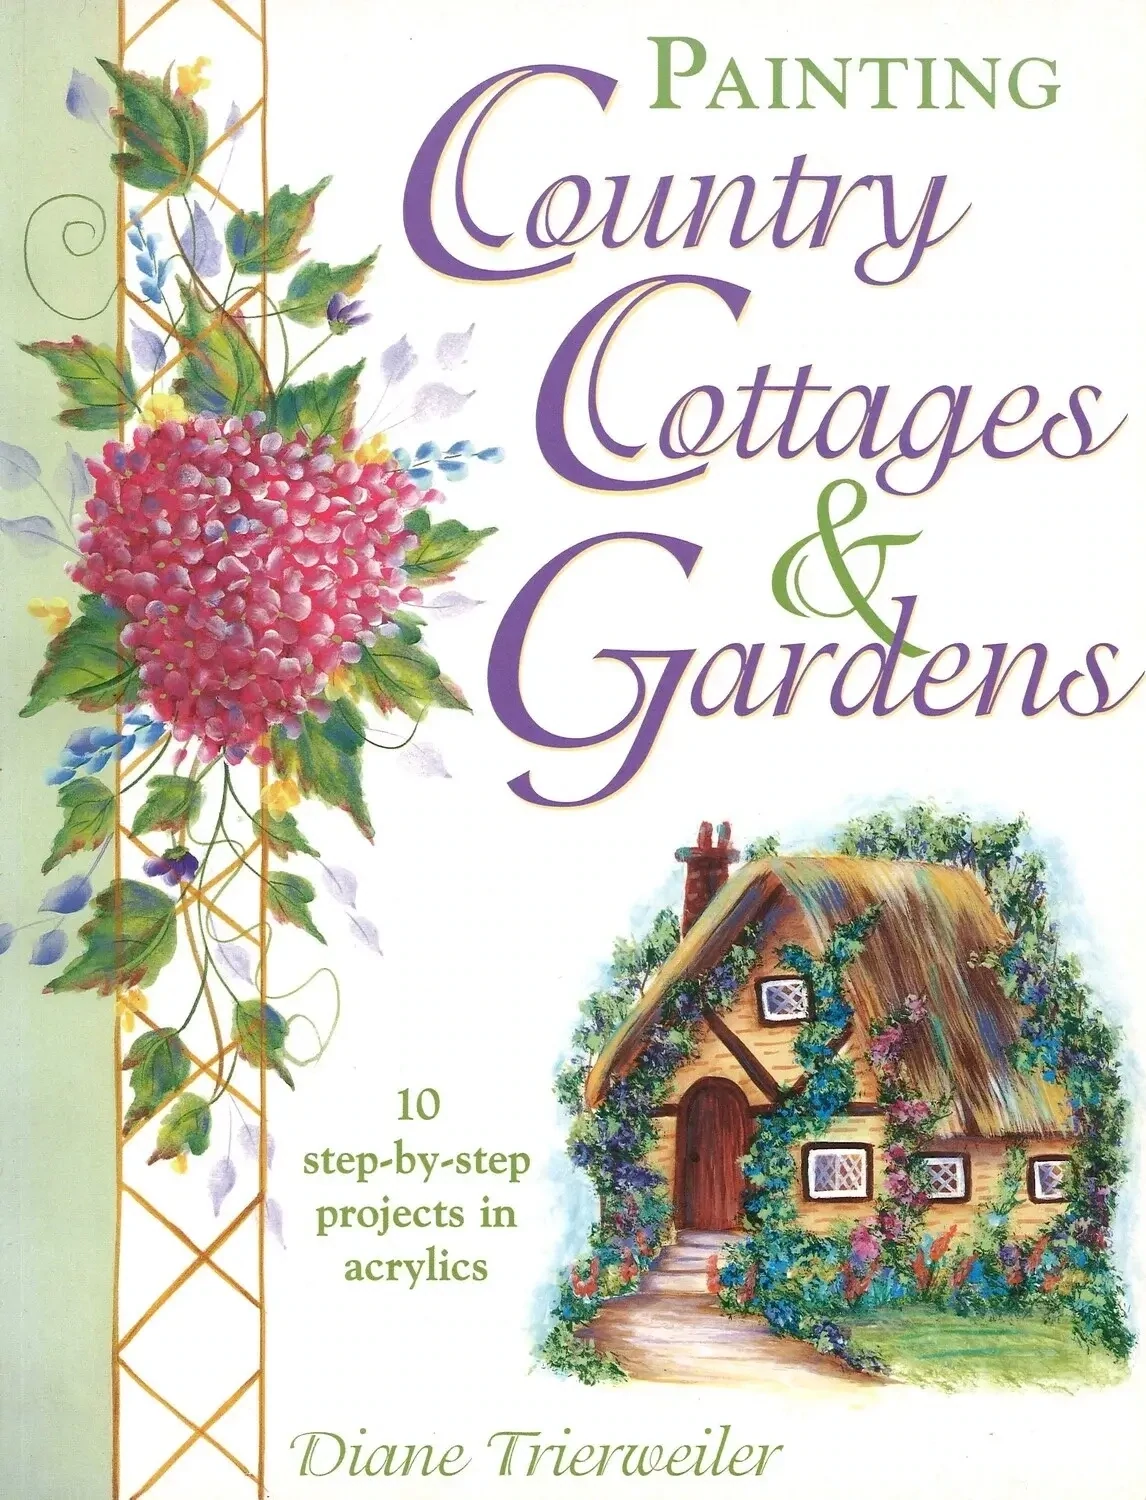 Painting Country Cottages and Gardens by Diane Trierweiler